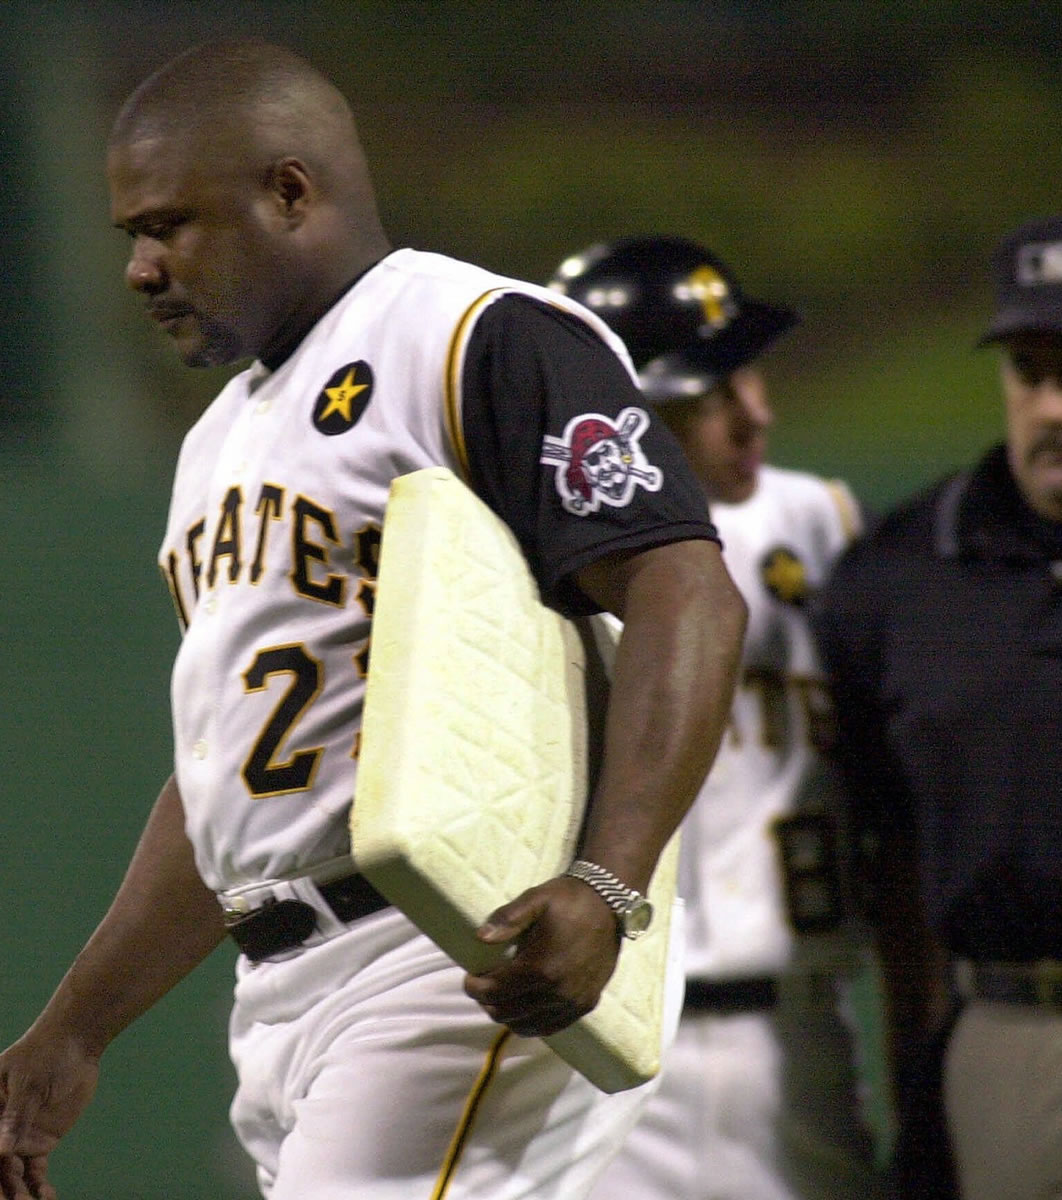 Pittsburgh Pirates manager Lloyd McClendon walks off the field carrying first base after being tossed from the game against the Milwaukee Brewers for arguing a call at first with umpire Rick Reed in this June 26, 2001 photo, in Pittsburgh. (AP Photo/Gene J.